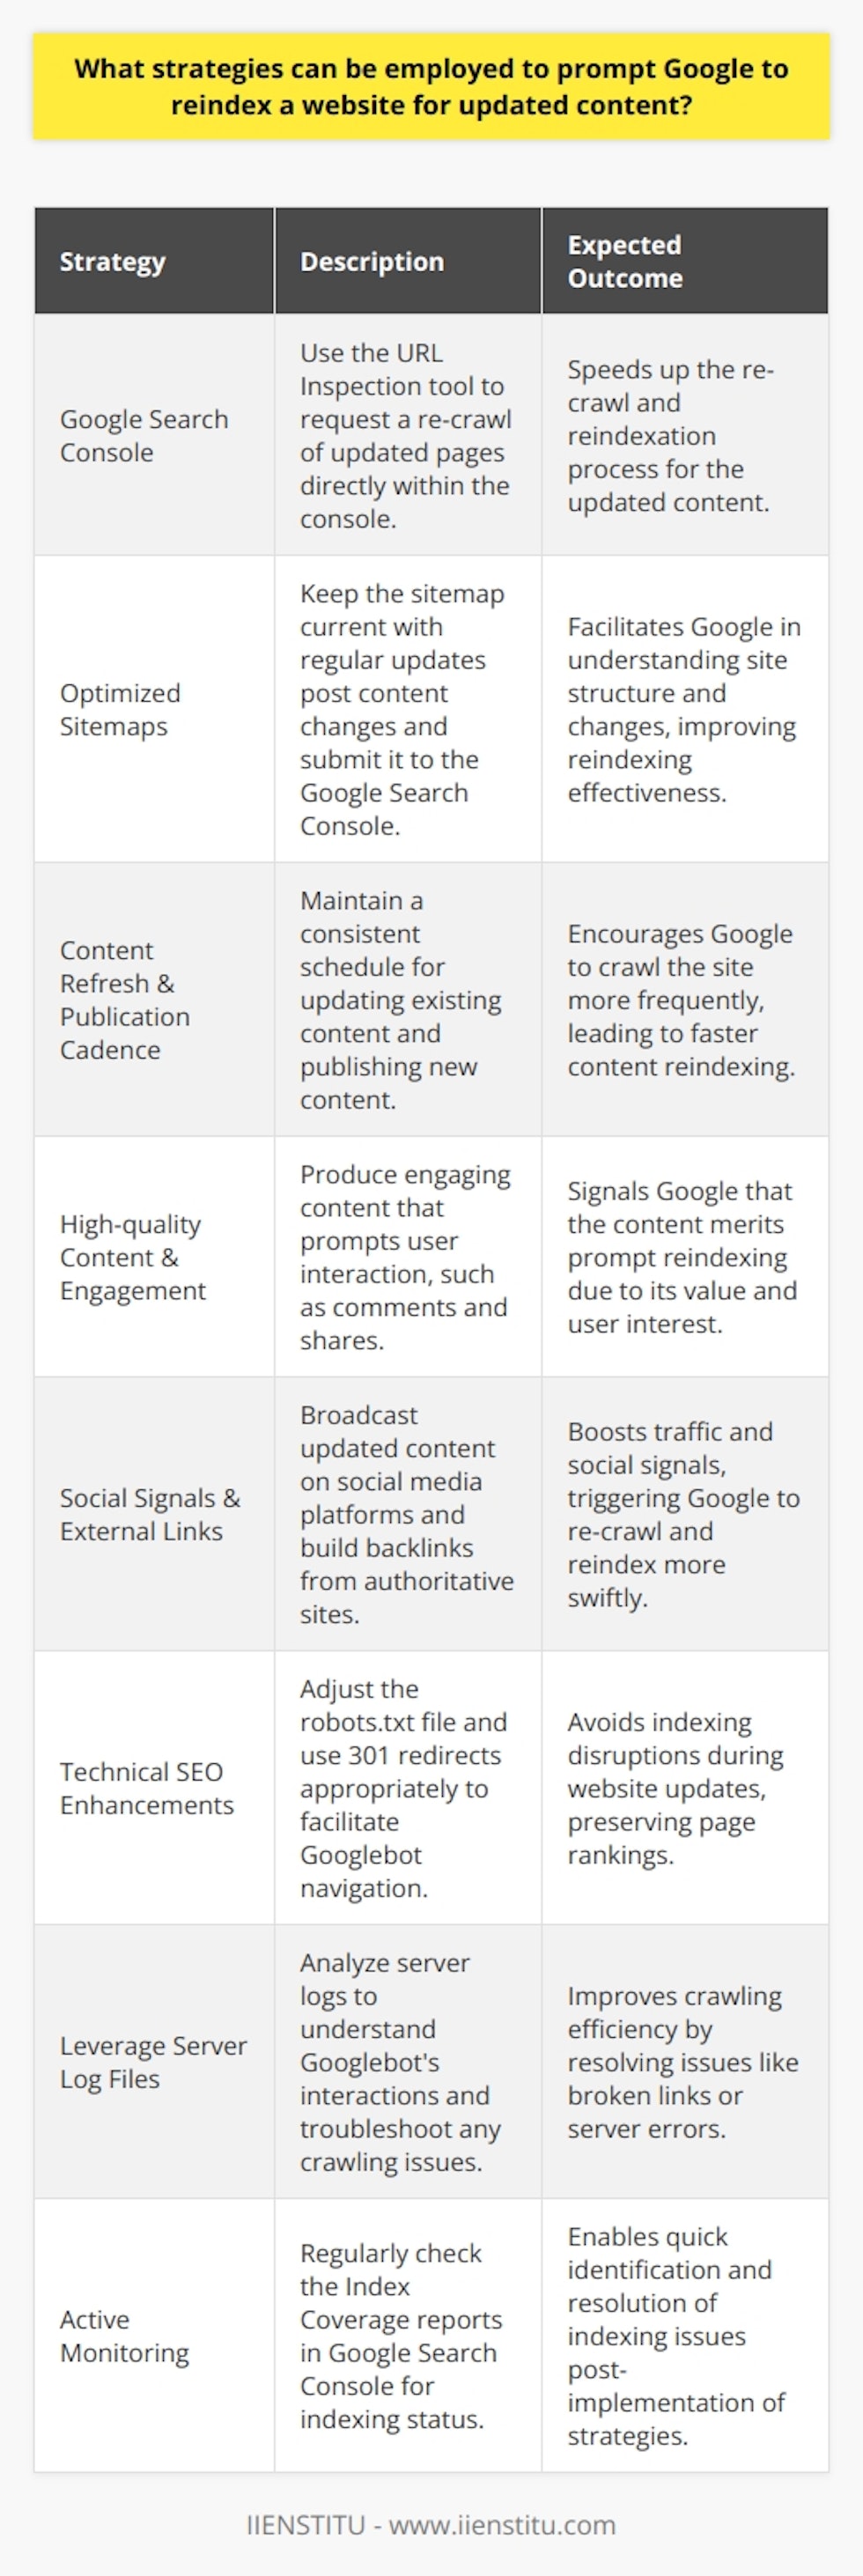 When updating content on a website, it's important to signal to Google that your pages have changed and need to be re-crawled and reindexed to reflect the updates. Below are tailored strategies to achieve this.**Strategic Use of Google Search Console**The Search Console is an invaluable tool provided by Google. Within the console, use the URL Inspection tool to request a re-crawl of updated content. This direct approach can speed up the reindexation process.**Optimized Sitemaps**Ensure that your sitemap is updated regularly, especially after content changes. A current sitemap submitted to Google Search Console helps Google understand the structure of your site and any recent updates. It acts as a map that Google can follow to reindex your content.**Content Refreshment and Publication Cadence**Regularly refreshing your content and maintaining a steady rhythm of publishing new content can condition Google to crawl your site more often. Google's algorithms prefer fresh, updated content, and this can lead to more frequent indexing.**High-quality Content and User Engagement**Google favors content that engages users. Increased user interactions, such as comments, shares, and time on page, may indicate to Google that the content is valuable and therefore should be indexed promptly.**Social Signals and External Links**Social media can be a trigger for faster reindexation. Sharing updated content on social platforms can generate traffic and social signals, which can prompt Google to re-crawl and reindex a page. Building quality backlinks from other authoritative sites can also lead to increased crawl rates and faster indexing.**Technical SEO Enhancements**Ensure that your robots.txt file isn't inadvertently blocking Google from crawling updated pages. Use 301 redirects wisely to avoid losing any page rank during content updates and migrations. Clear directives in your robots.txt file and proper use of redirects can ensure Google's bots navigate and index your site correctly.**Leverage Server Log Files**By analyzing server log files, you can understand how Googlebot interacts with your website. This allows you to identify and fix problems that might be preventing efficient crawling and indexing, such as broken links or server errors.**Active Monitoring**After applying these strategies, actively monitor indexing status using the Google Search Console. Keep an eye on Index Coverage reports to identify if Google encounters any issues while accessing your content for indexing.By combining these strategies, webmasters can signal to Google that their site's content has been updated and needs attention. This holistic approach helps ensure that the website’s content remains dynamic in Google's index, enhancing visibility and relevancy in search results.